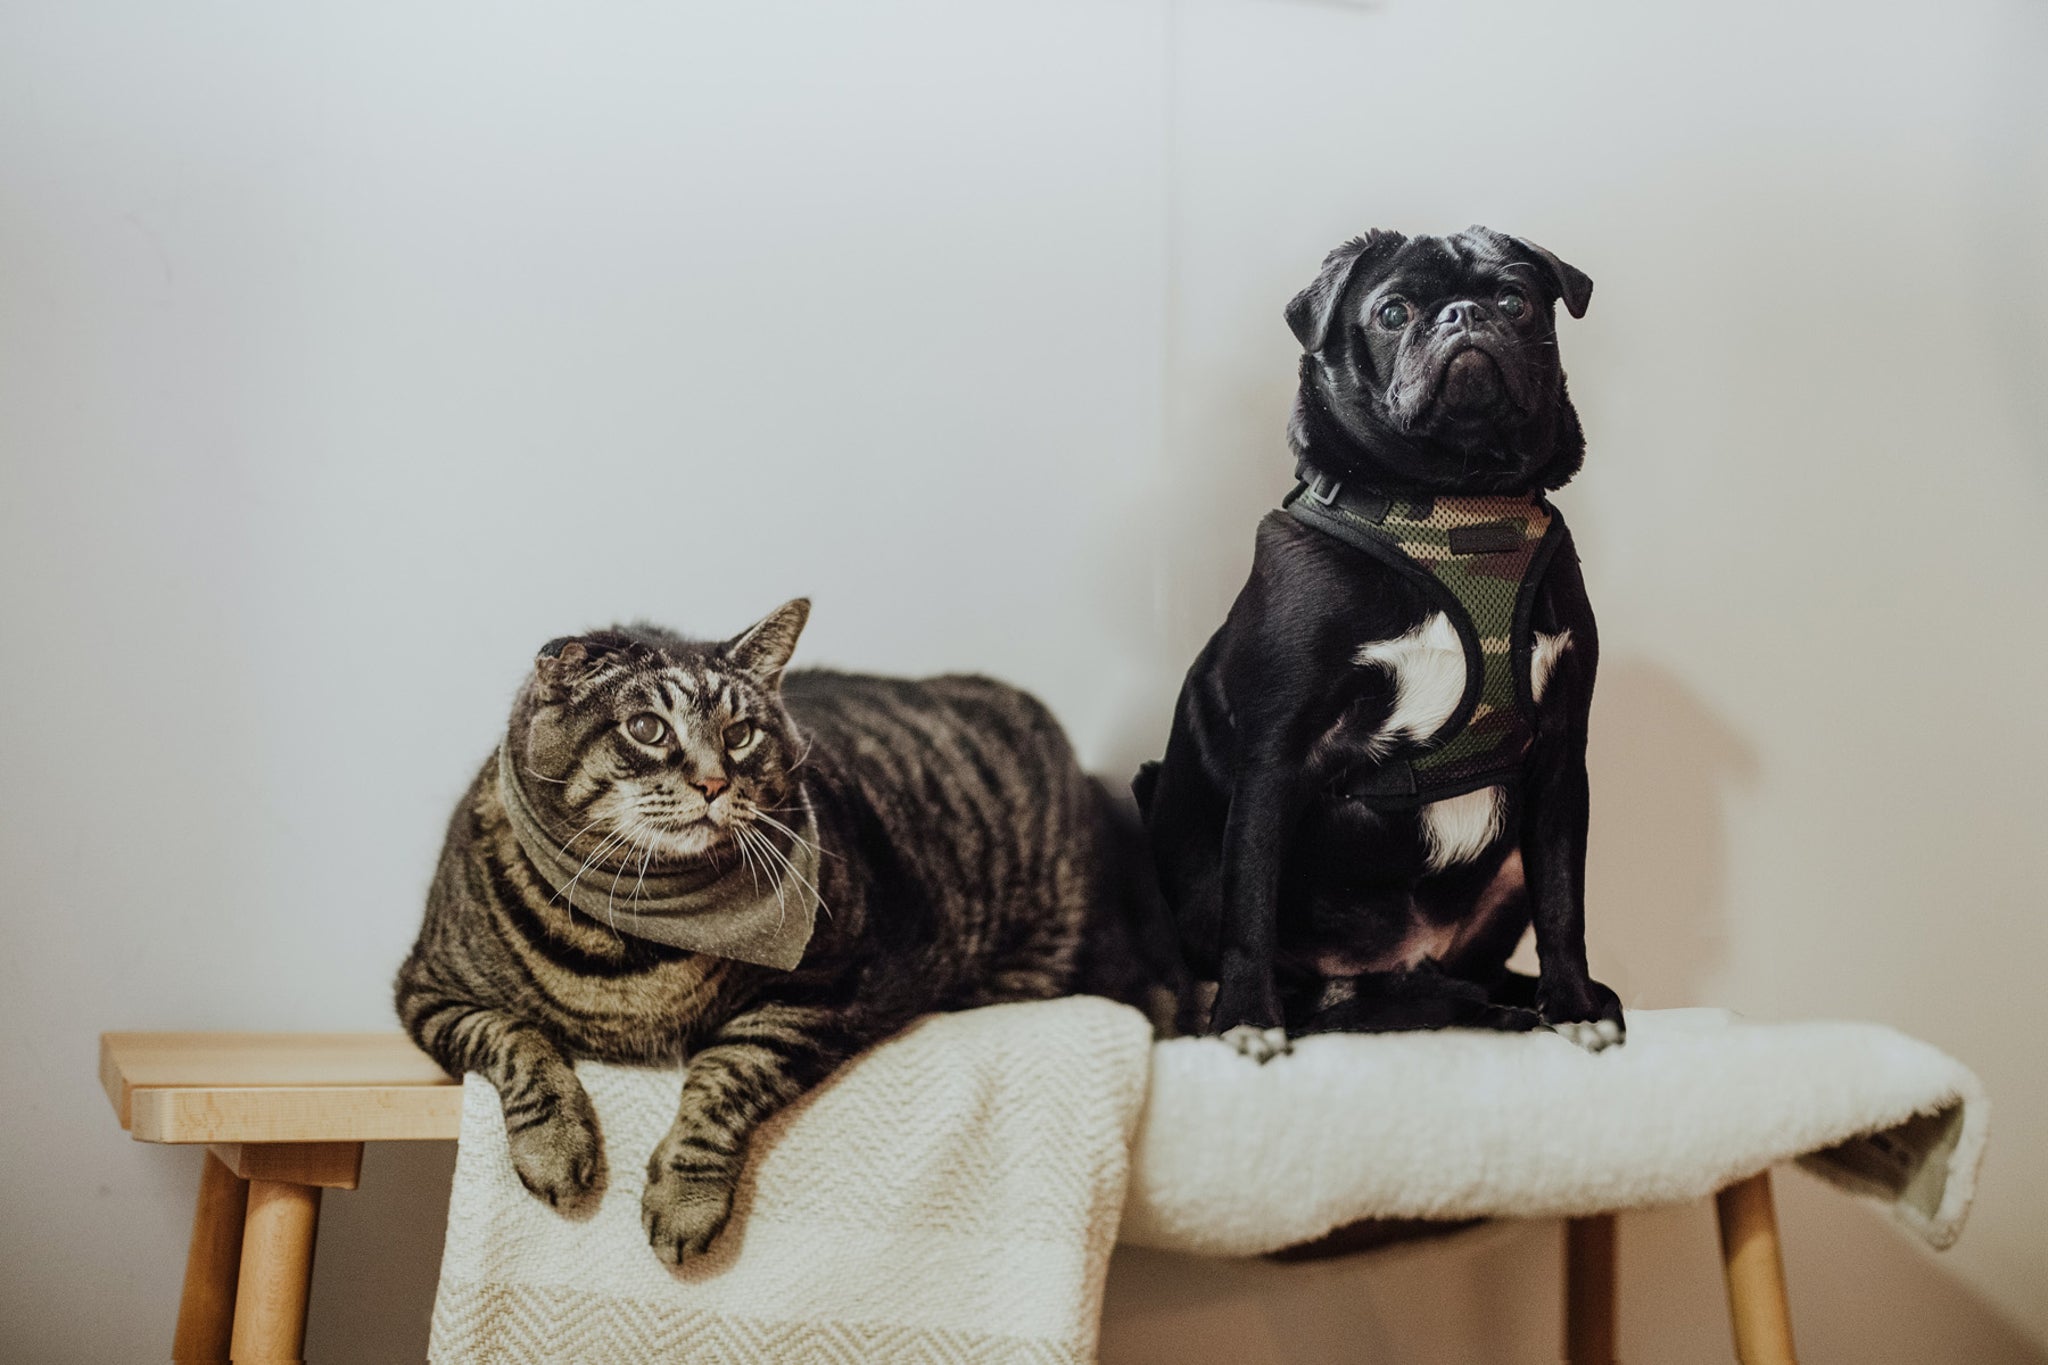 striped cat and black pug sitting on bench together